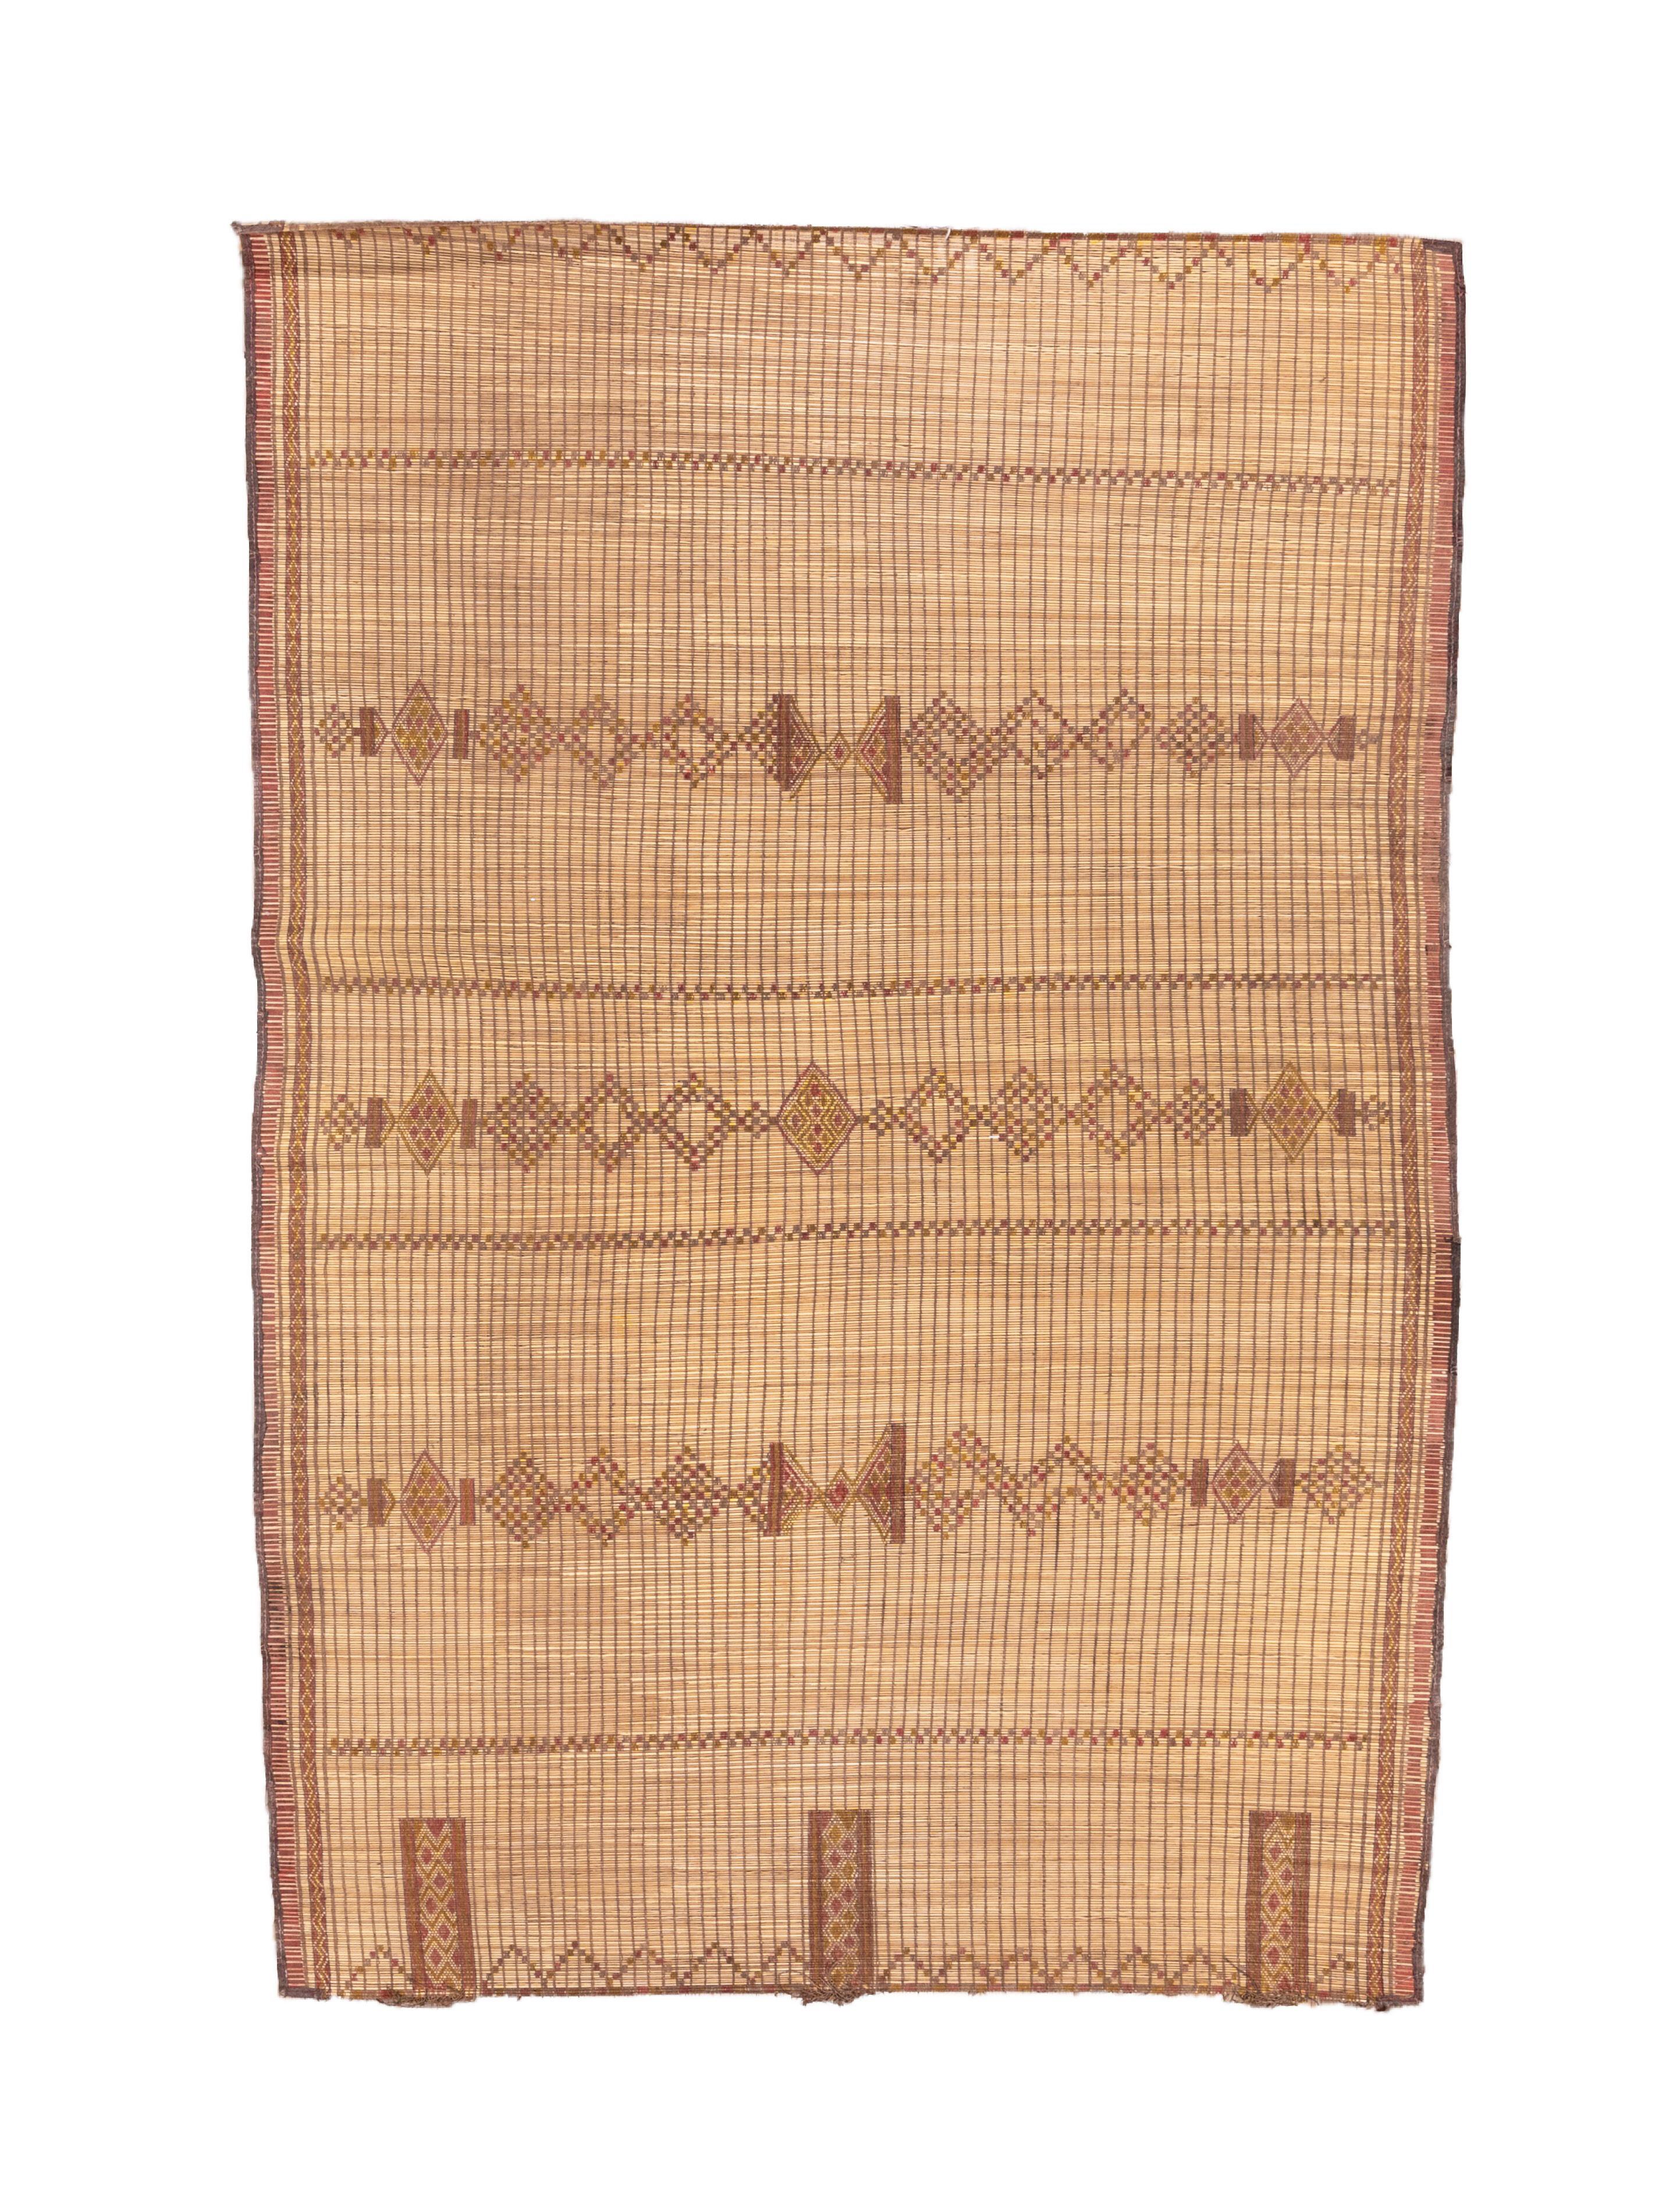 River reeds are bound together to create this attractive, tribal flatweave. Light tan reeds comprise the ground while three echelons of diamond chains in darker browns run across the centre. Rectangles stand at one end and zig-zags function as end